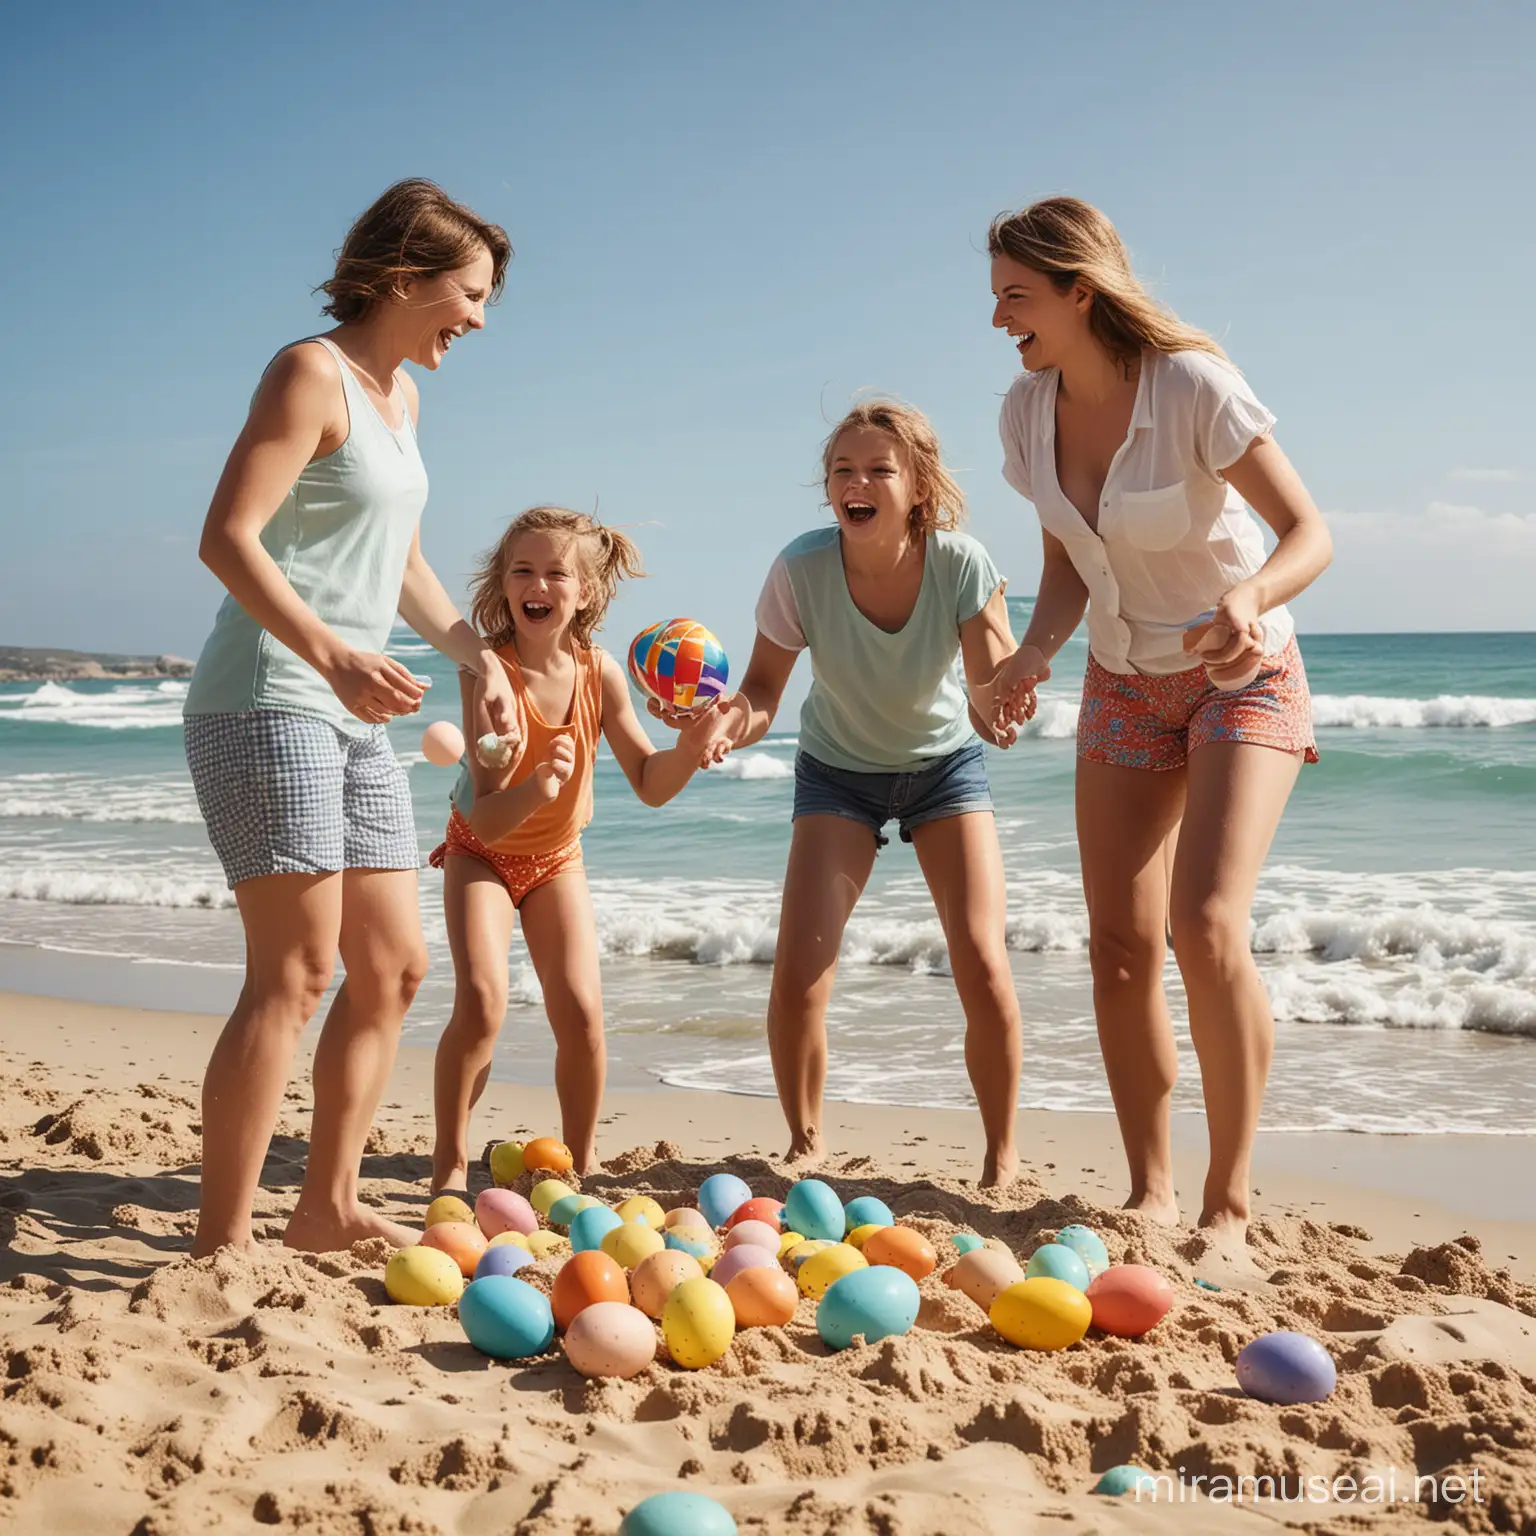 A joyful and vibrant scene of a european family playing together on a sunny beach. They are surrounded by colorful Easter eggs of various sizes, some filled with treats and others empty. The family members are all smiling, engaging in fun activities like beach volleyball or building sandcastles. The sky is a bright blue, and the waves are gentle, creating a sense of relaxation and happiness. The overall atmosphere is festive and cheerful, perfect for an Easter celebration.